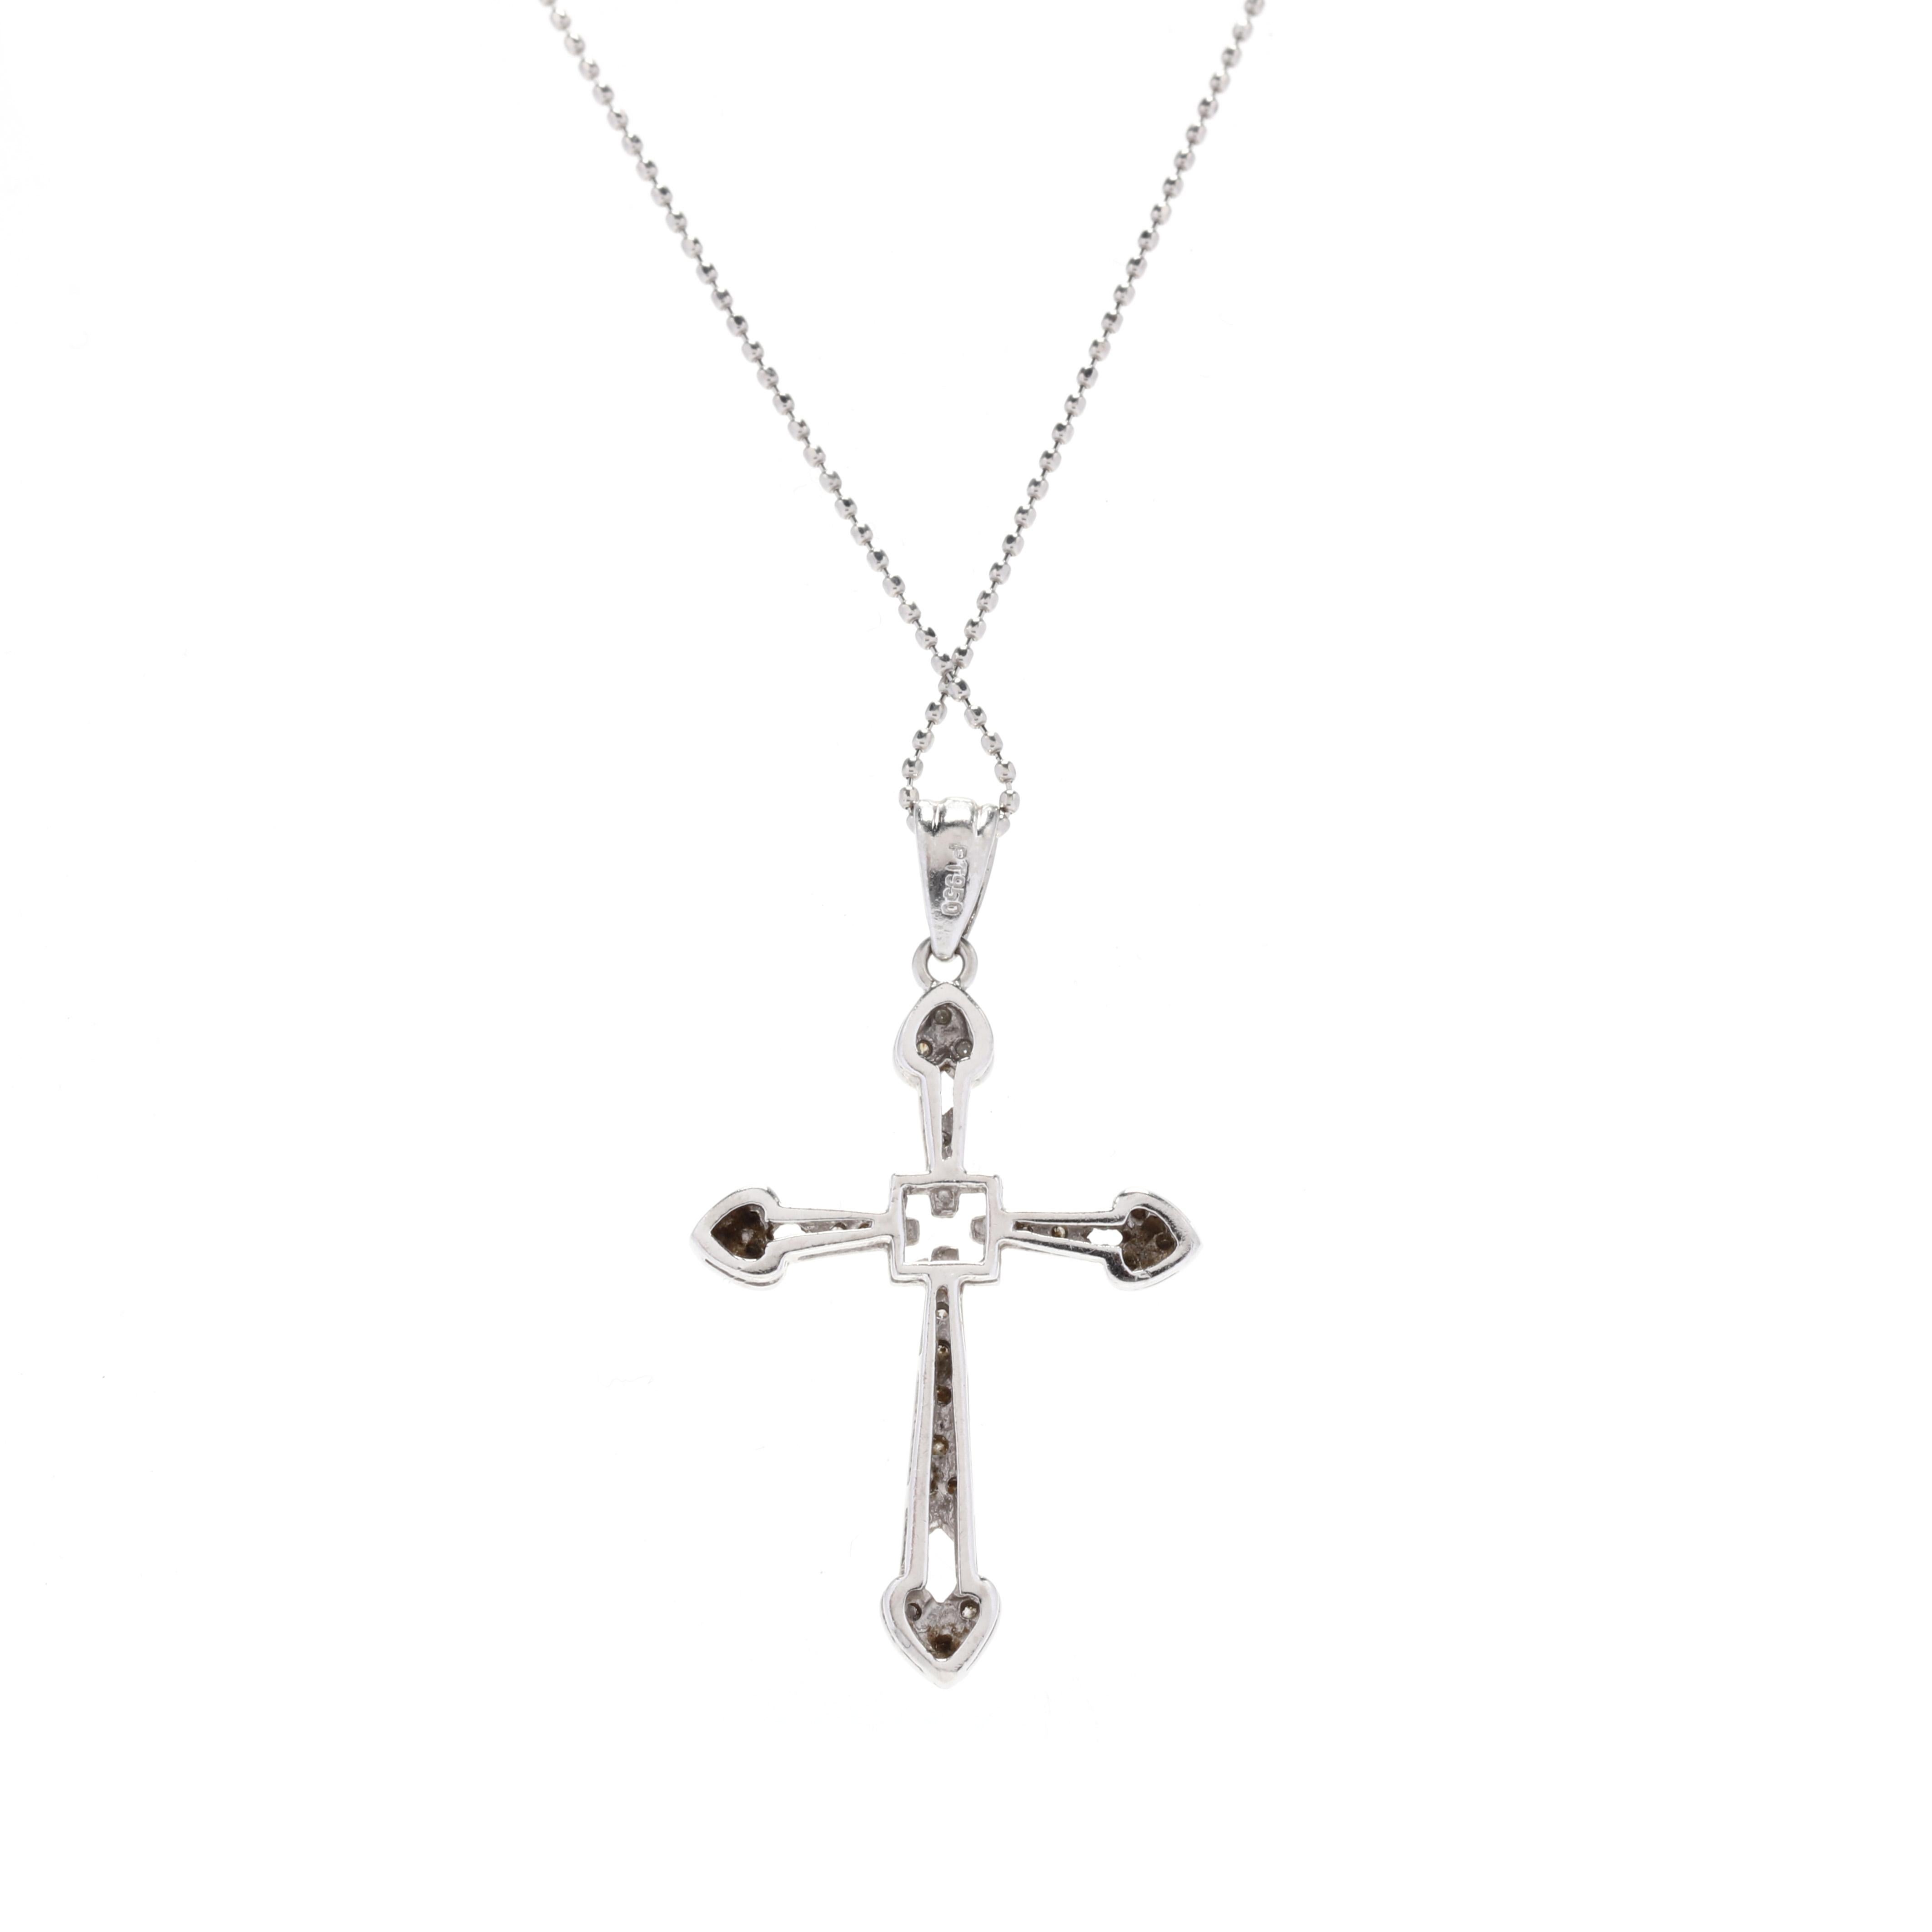 A vintage platinum and diamond cross necklace. This necklace features a cross design with a heart motif at each end, set with full cut round diamonds weighing approximately .15 total carats and suspended from a bead chain.



Stones:

- diamonds, 24